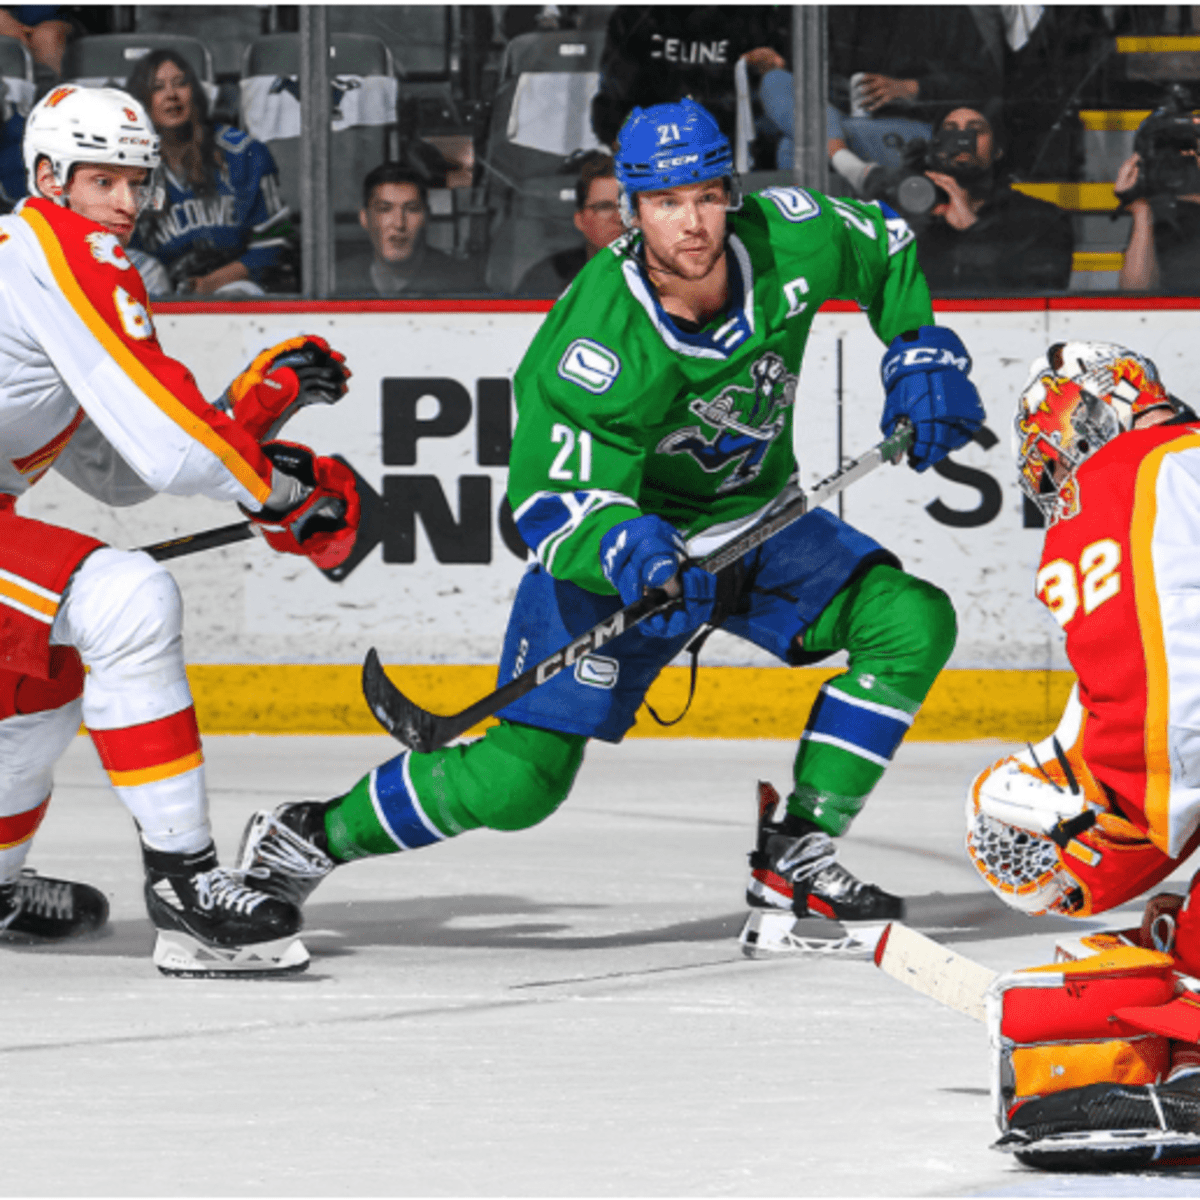 The Canucks AHL affiliate is the Abbotsford Canucks - Vancouver Is Awesome